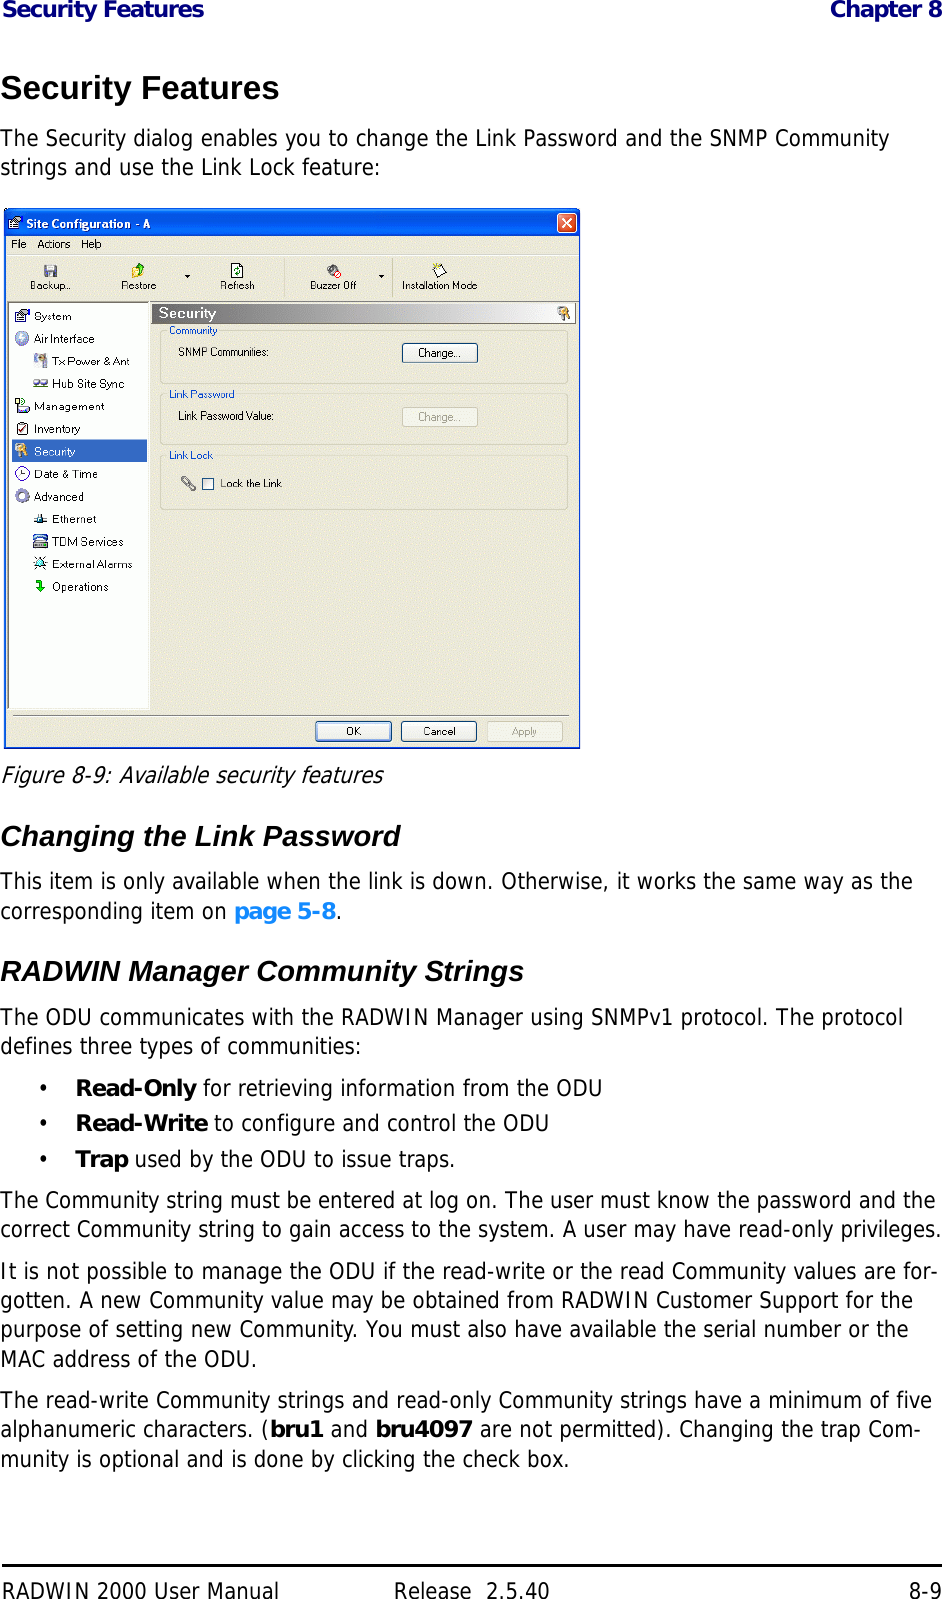 Security Features Chapter 8RADWIN 2000 User Manual Release  2.5.40 8-9Security FeaturesThe Security dialog enables you to change the Link Password and the SNMP Community strings and use the Link Lock feature: Figure 8-9: Available security featuresChanging the Link PasswordThis item is only available when the link is down. Otherwise, it works the same way as the corresponding item on page 5-8.RADWIN Manager Community StringsThe ODU communicates with the RADWIN Manager using SNMPv1 protocol. The protocol defines three types of communities:•Read-Only for retrieving information from the ODU•Read-Write to configure and control the ODU•Trap used by the ODU to issue traps.The Community string must be entered at log on. The user must know the password and the correct Community string to gain access to the system. A user may have read-only privileges.It is not possible to manage the ODU if the read-write or the read Community values are for-gotten. A new Community value may be obtained from RADWIN Customer Support for the purpose of setting new Community. You must also have available the serial number or the MAC address of the ODU.The read-write Community strings and read-only Community strings have a minimum of five alphanumeric characters. (bru1 and bru4097 are not permitted). Changing the trap Com-munity is optional and is done by clicking the check box.